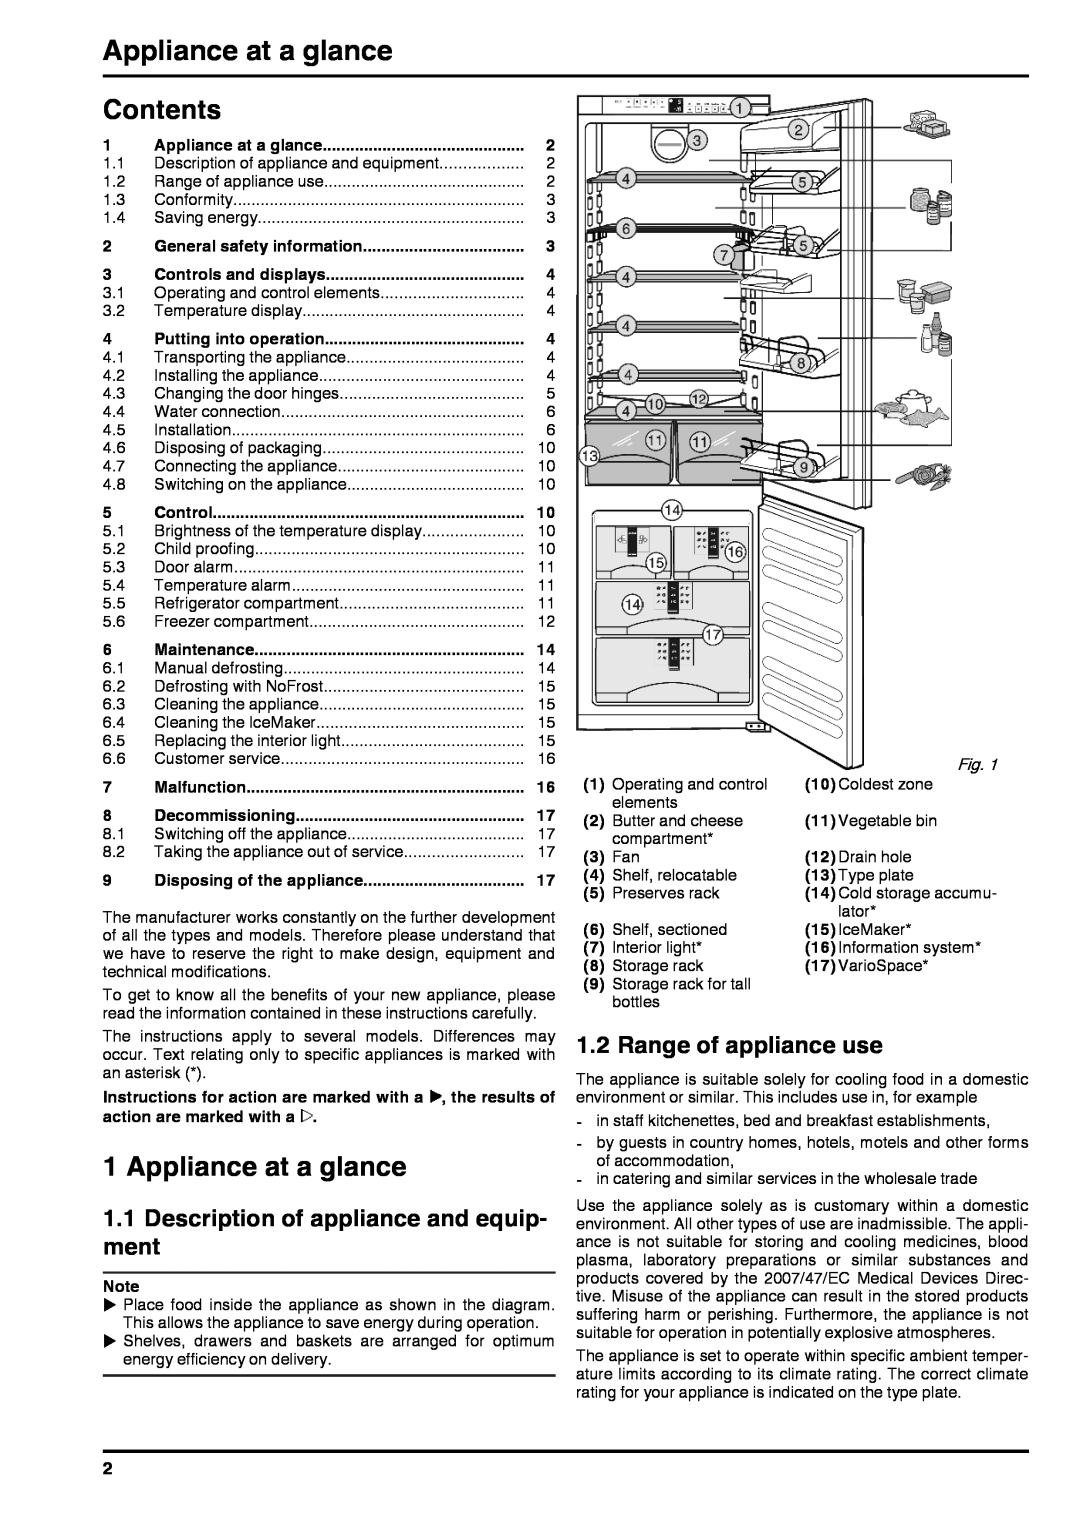 Liebherr 7084284-03 Appliance at a glance, Contents, Description of appliance and equip- ment, Range of appliance use 